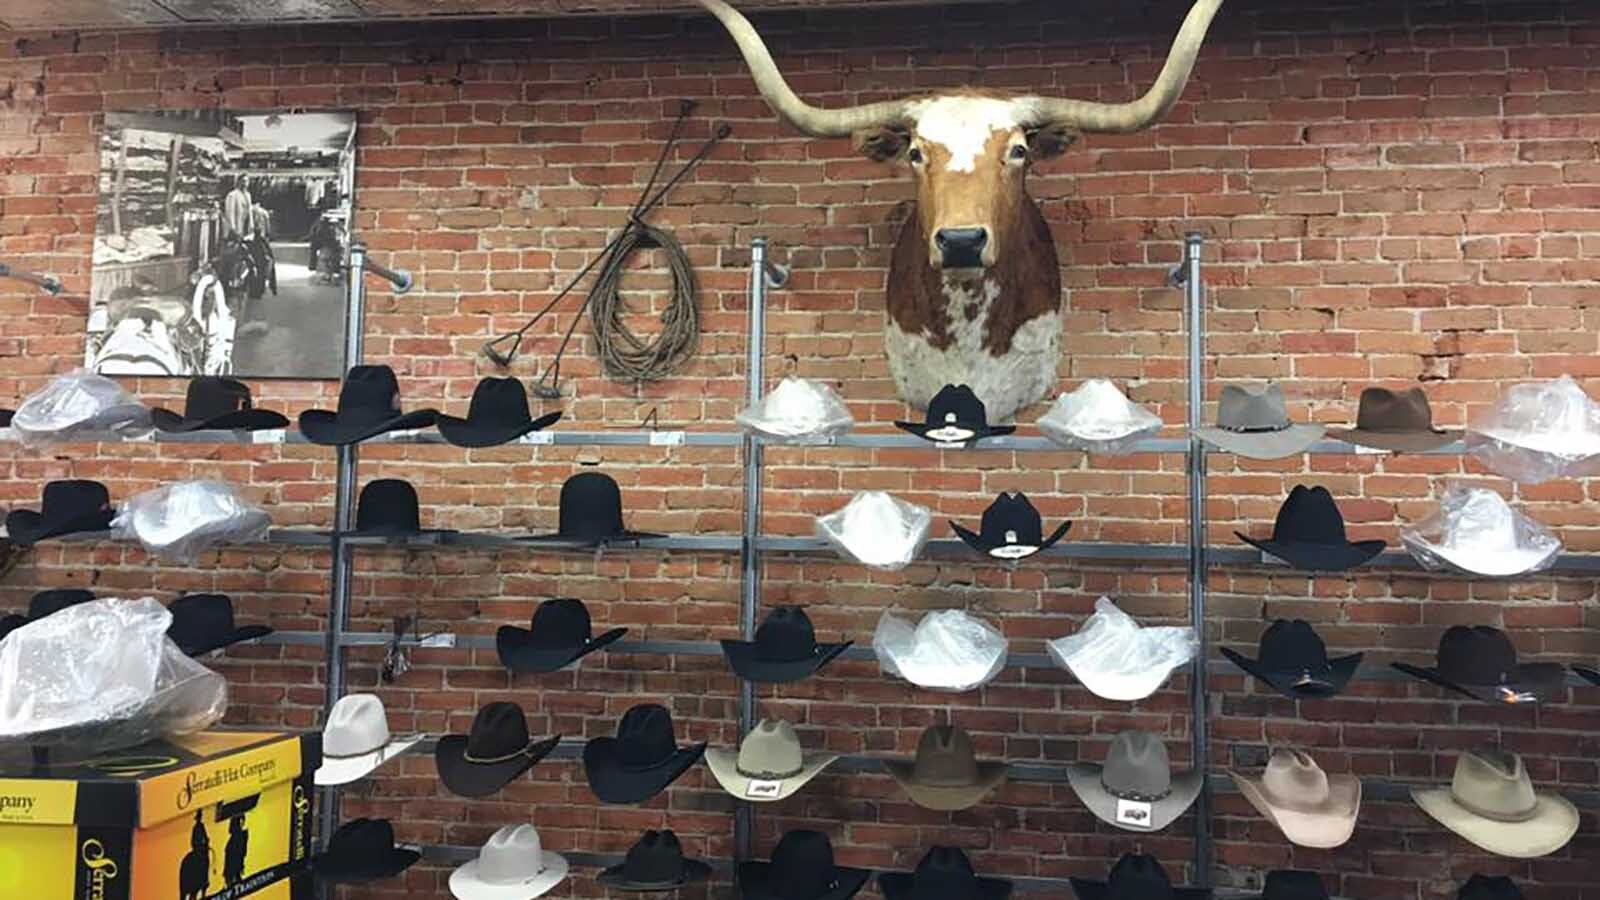 More cowboy hats under the mount of a longhorn steer.